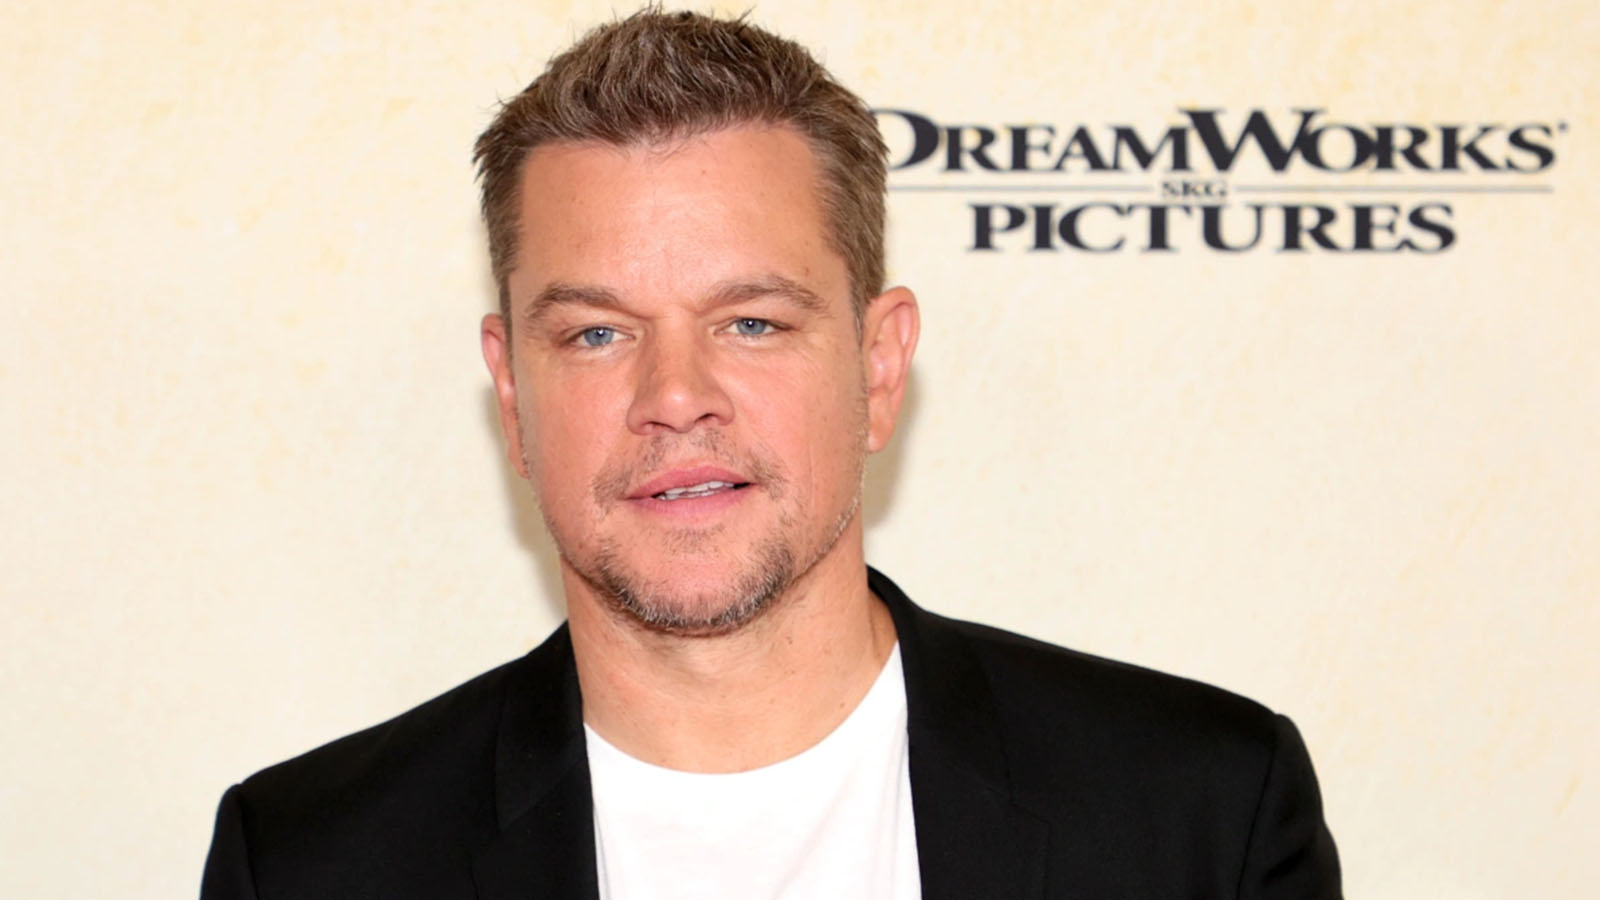 Matt Damon and how he was reeled into High Stake gambling by Hollywood